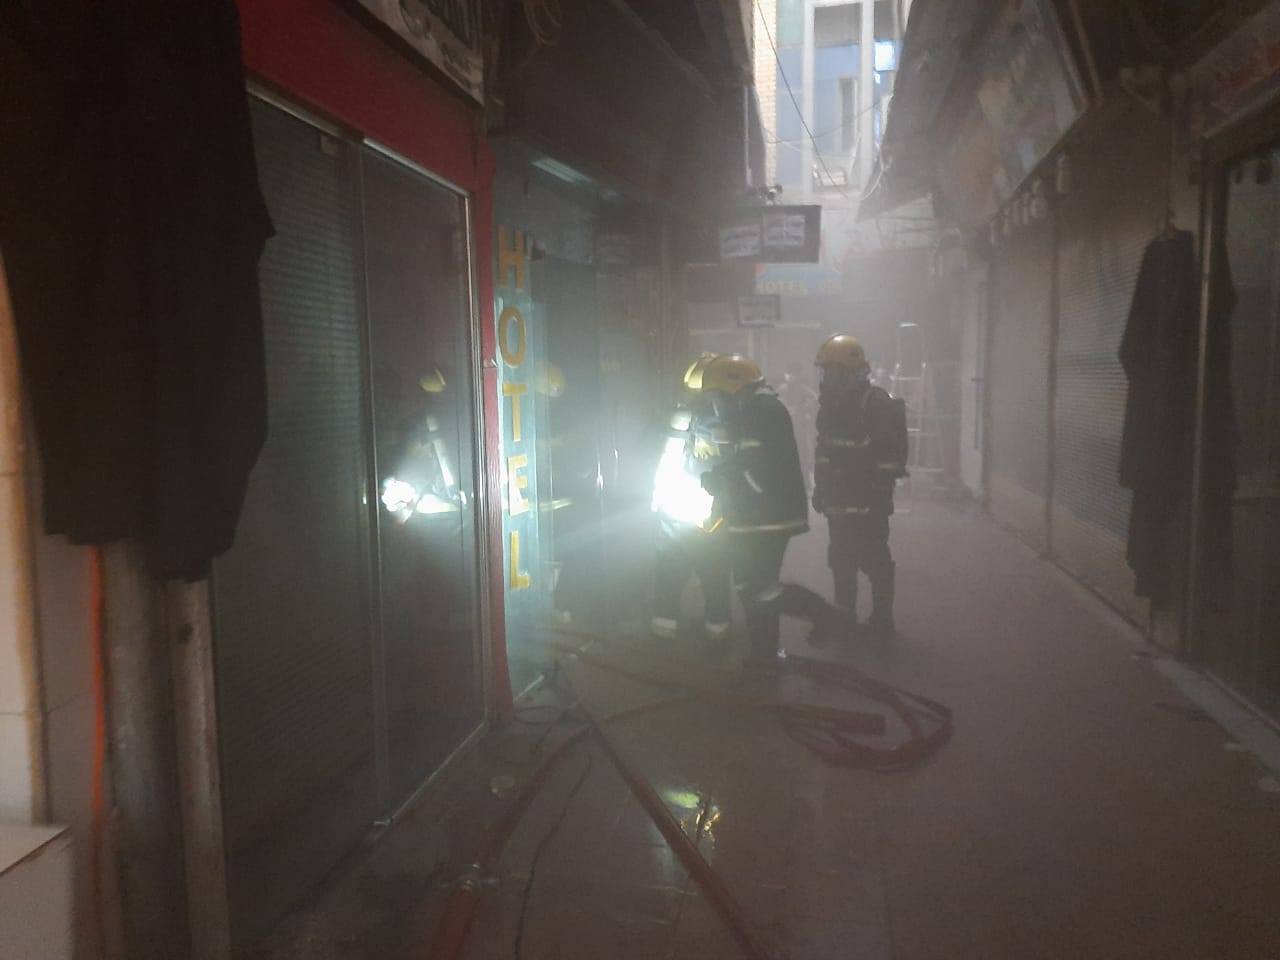 Firefighters extinguish a fire in a hotel in Najaf